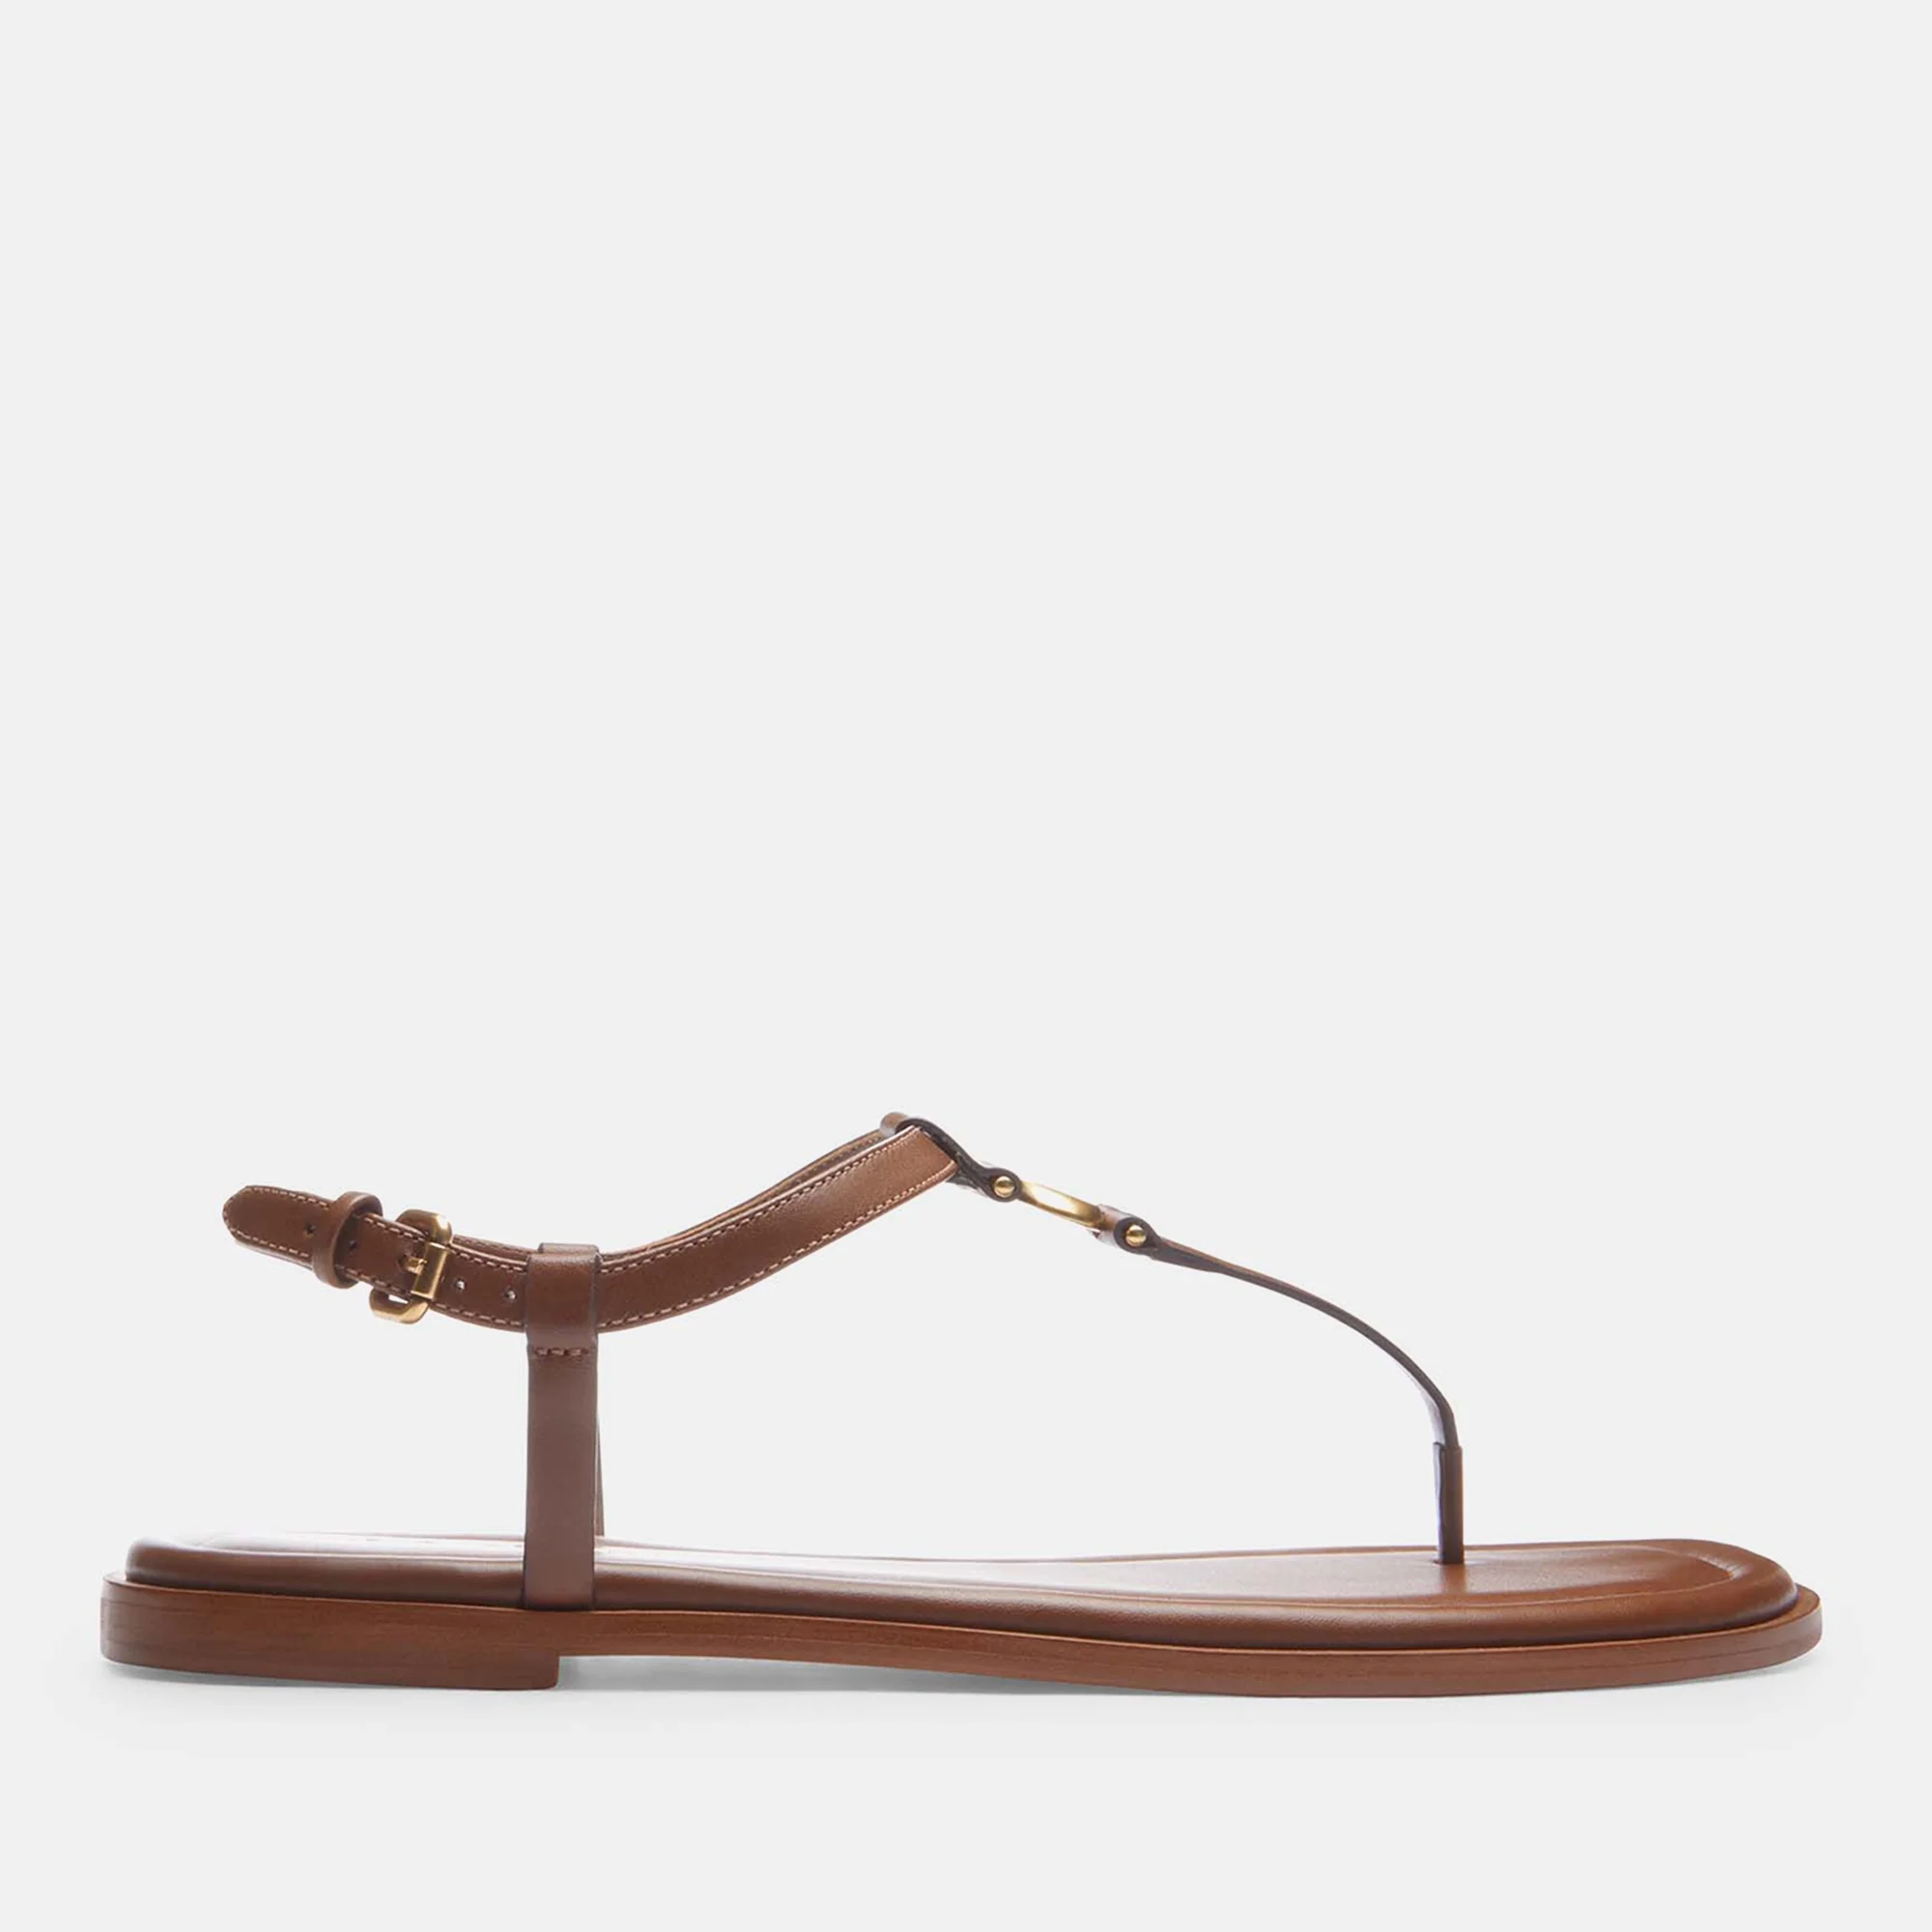 Coach Women's Jessica Leather Sandals Image 1